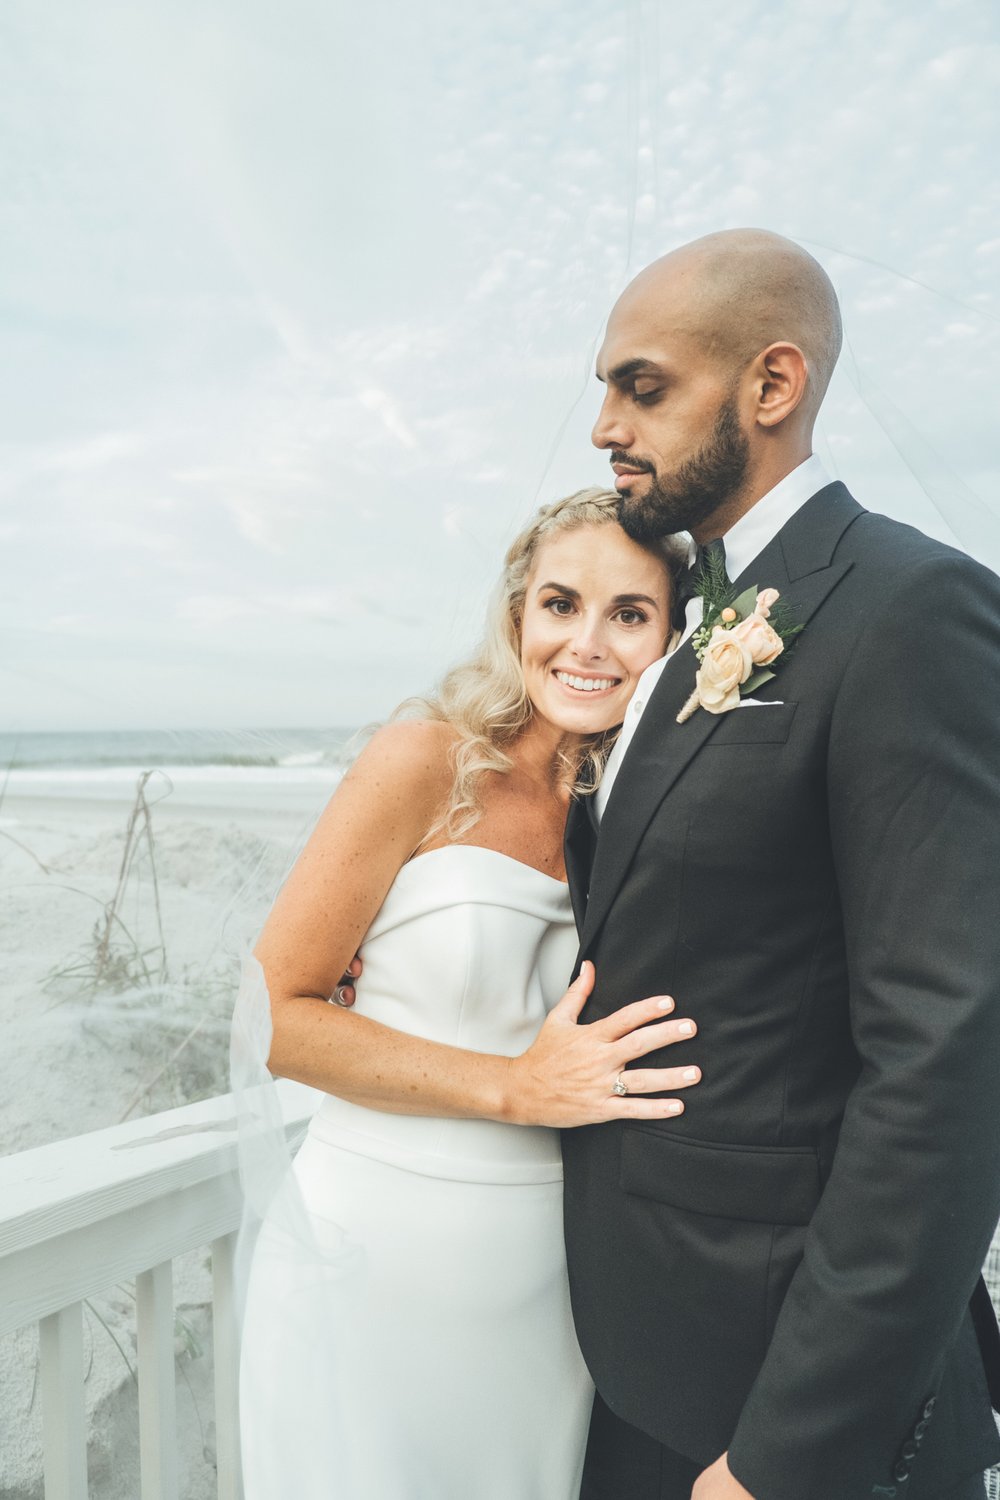 Southern Palms Studio couple's bridal portraits at Ponte Vedra's The Lodge & Club in Florida FL.jpg